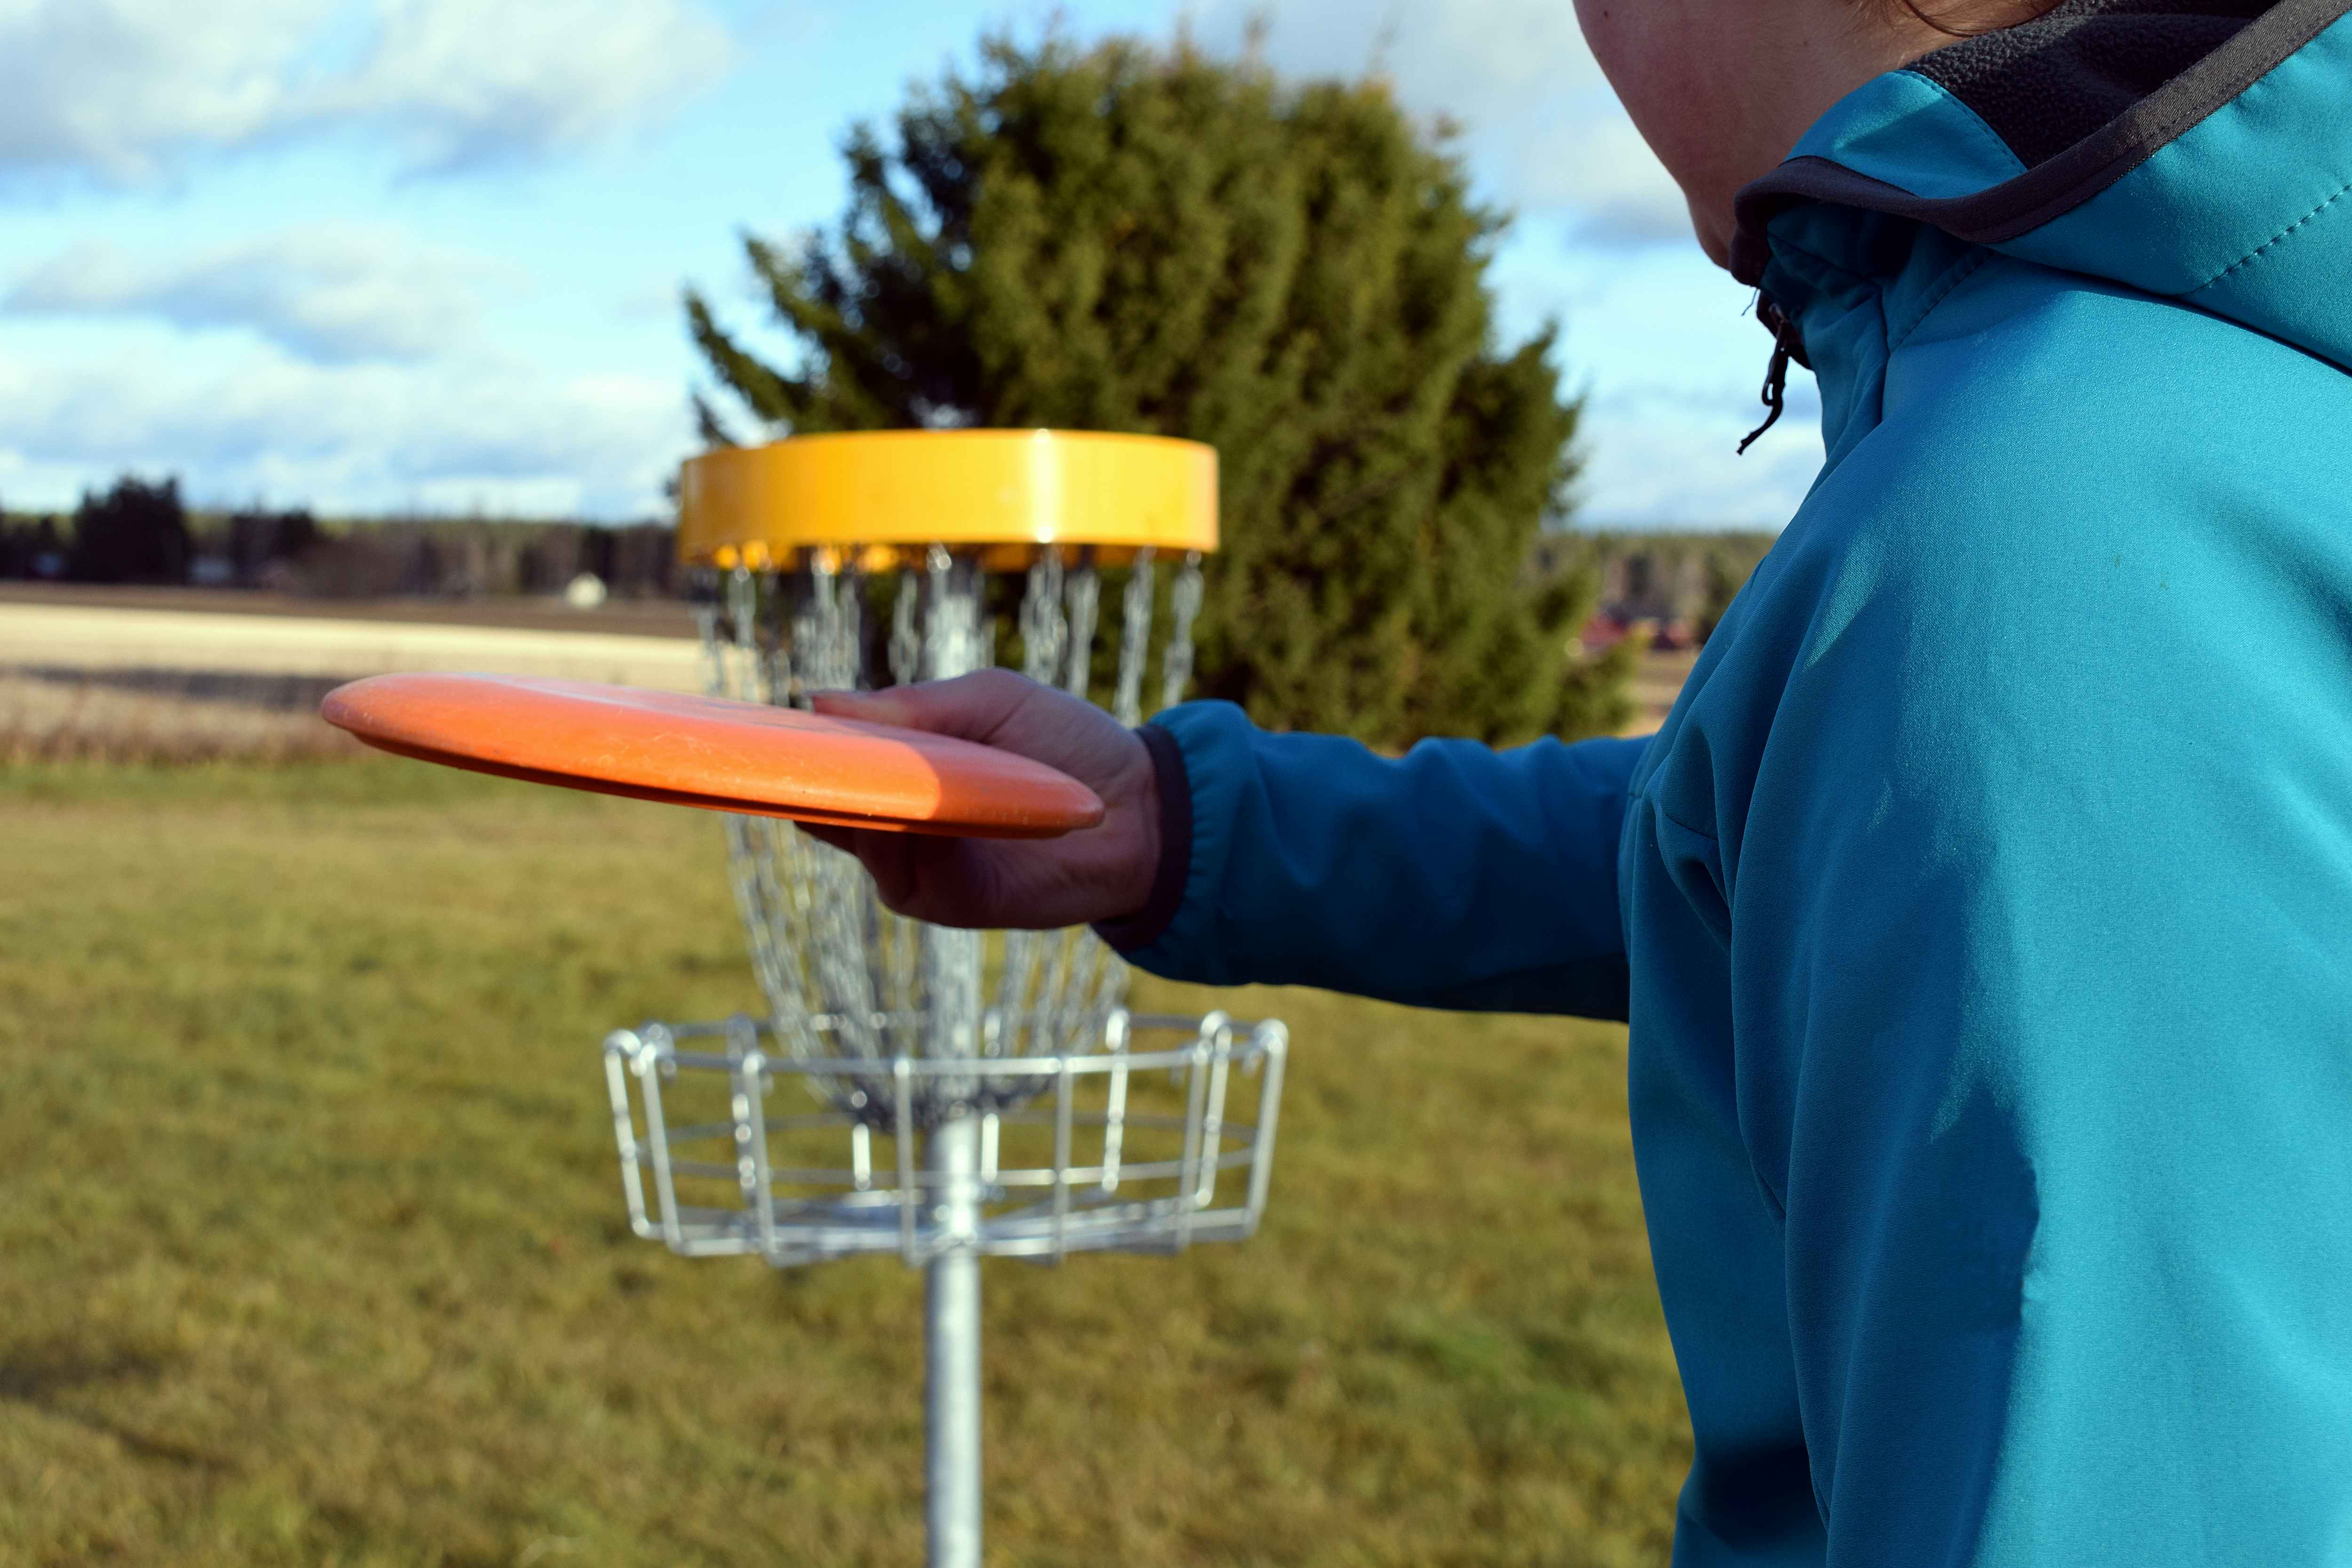 A person in a park playing disc golf, about to throw a frisbee at the goal.